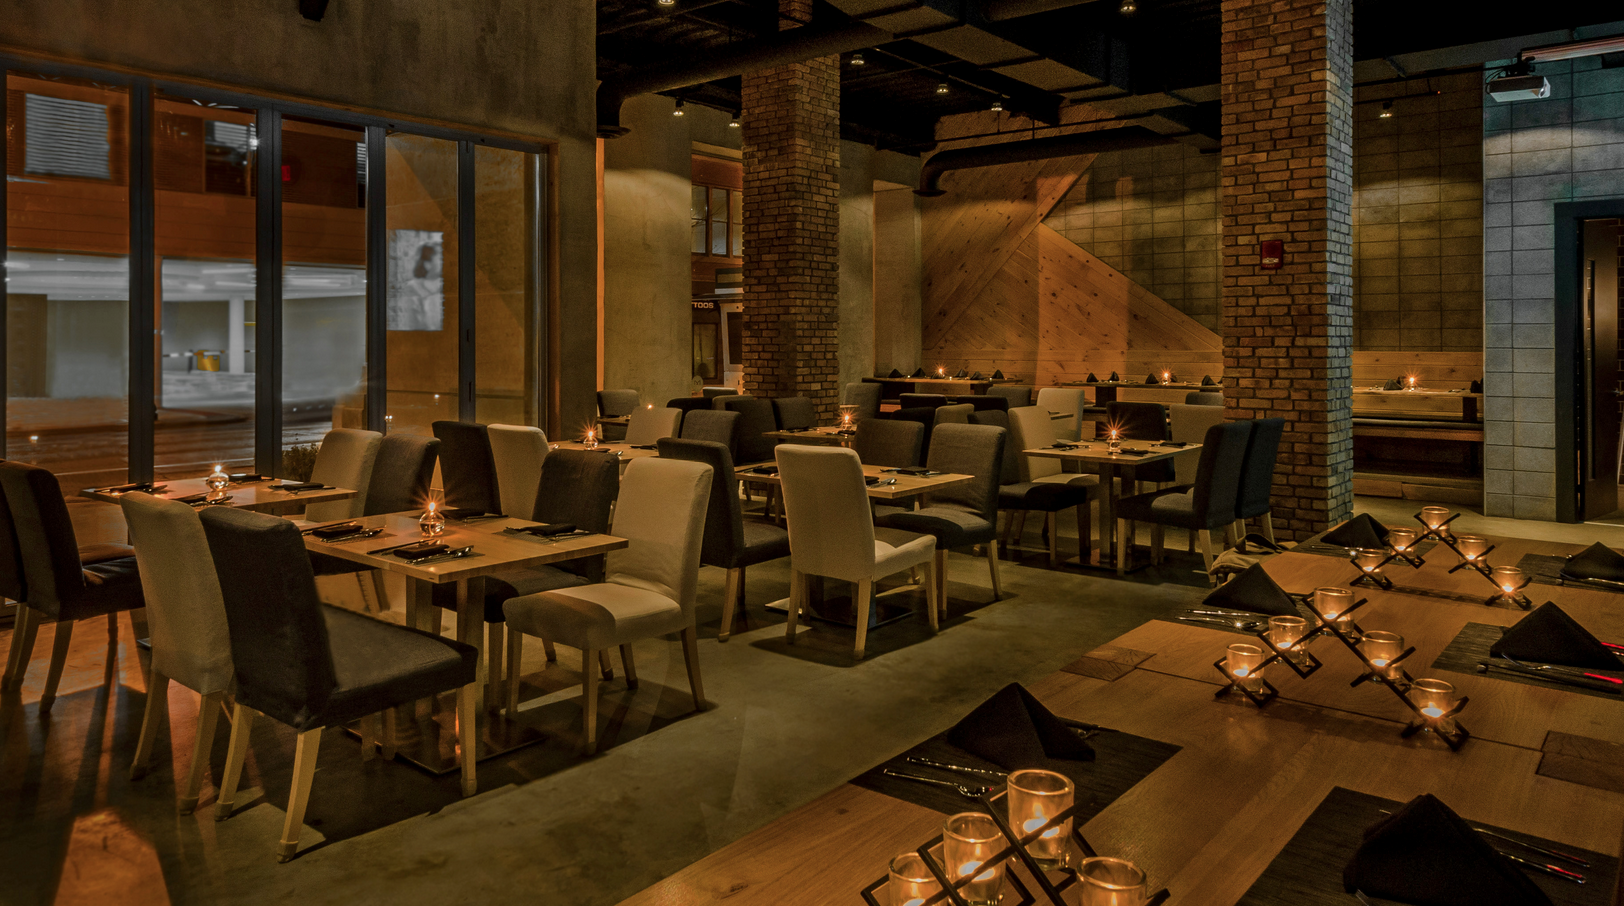 Miga named one of the top 5 restaurants in Illinois by OpenTable